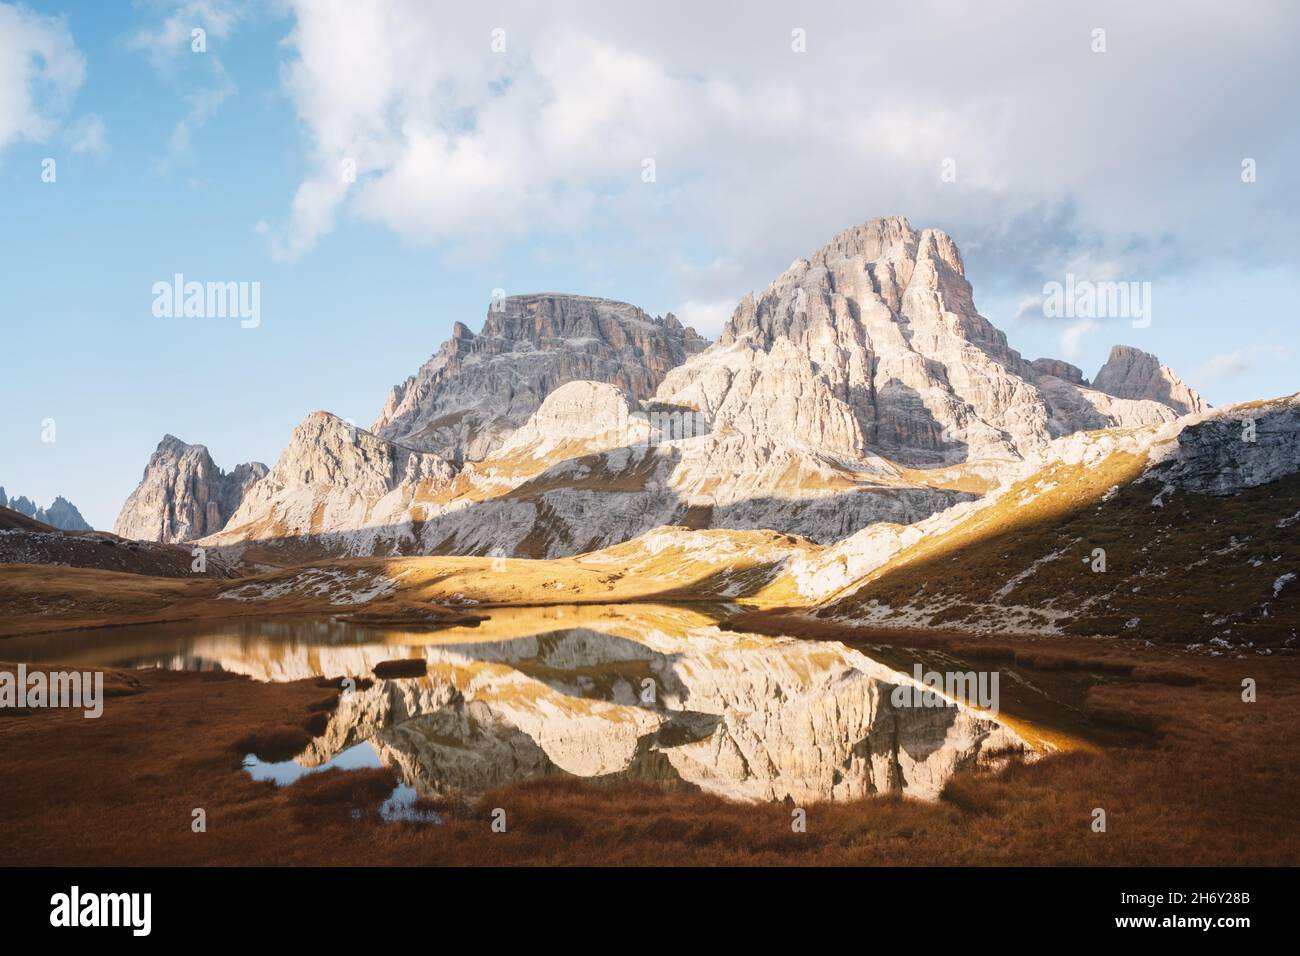 Clear water of alpine lake Piani in the Tre Cime Di Laveredo National Park, Dolomites, Italy. Picturesque landscape with Schusterplatte mountains, orange grass and small lake in autumn Dolomite Alps Stock Photo